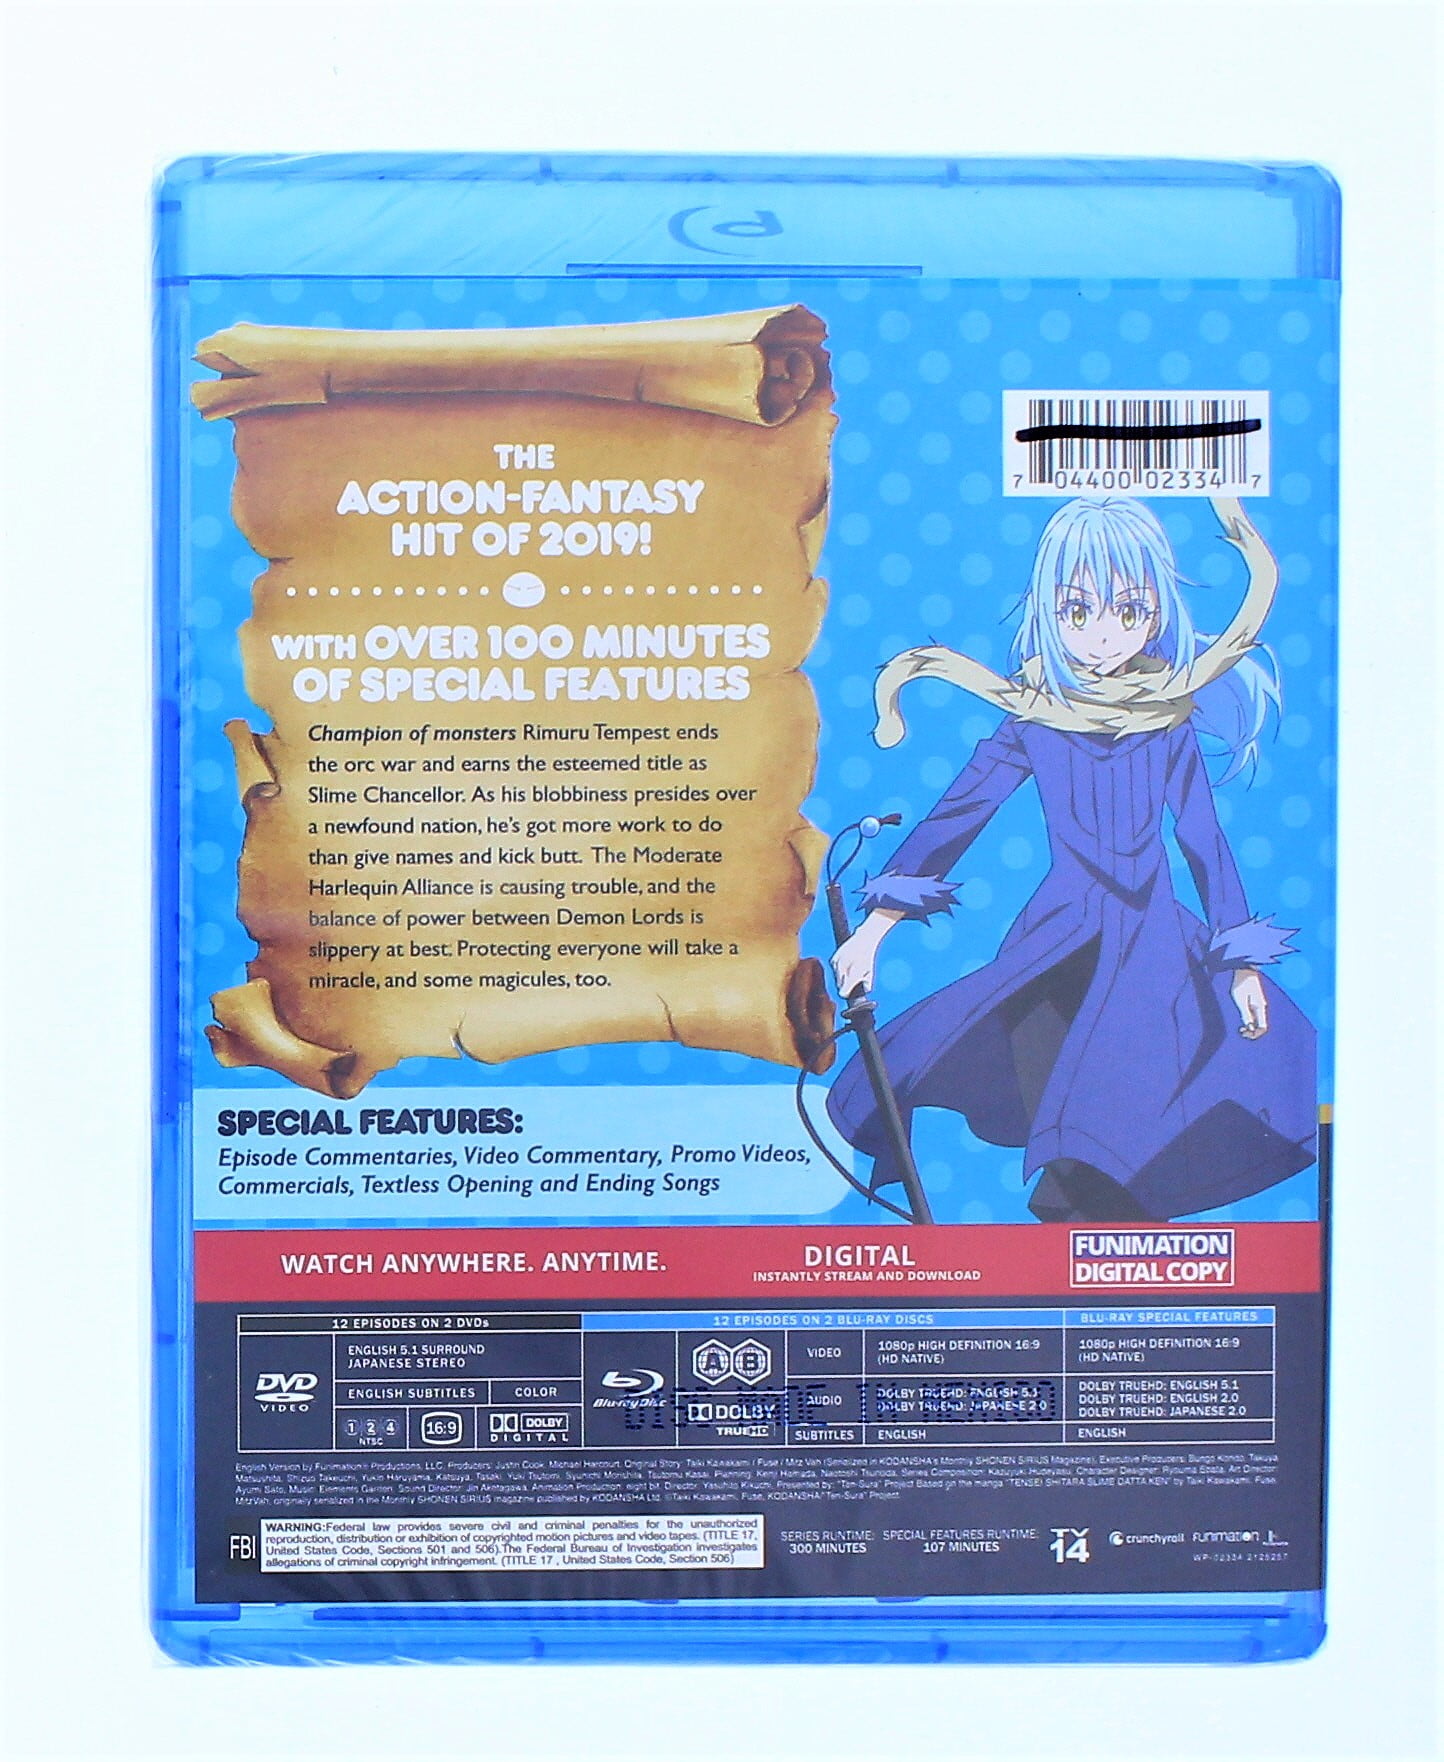 That Time I Got Reincarnated as a Slime: Season Two Part 2 - Limited  Edition Blu-ray + DVD : Various, Various: Movies & TV 